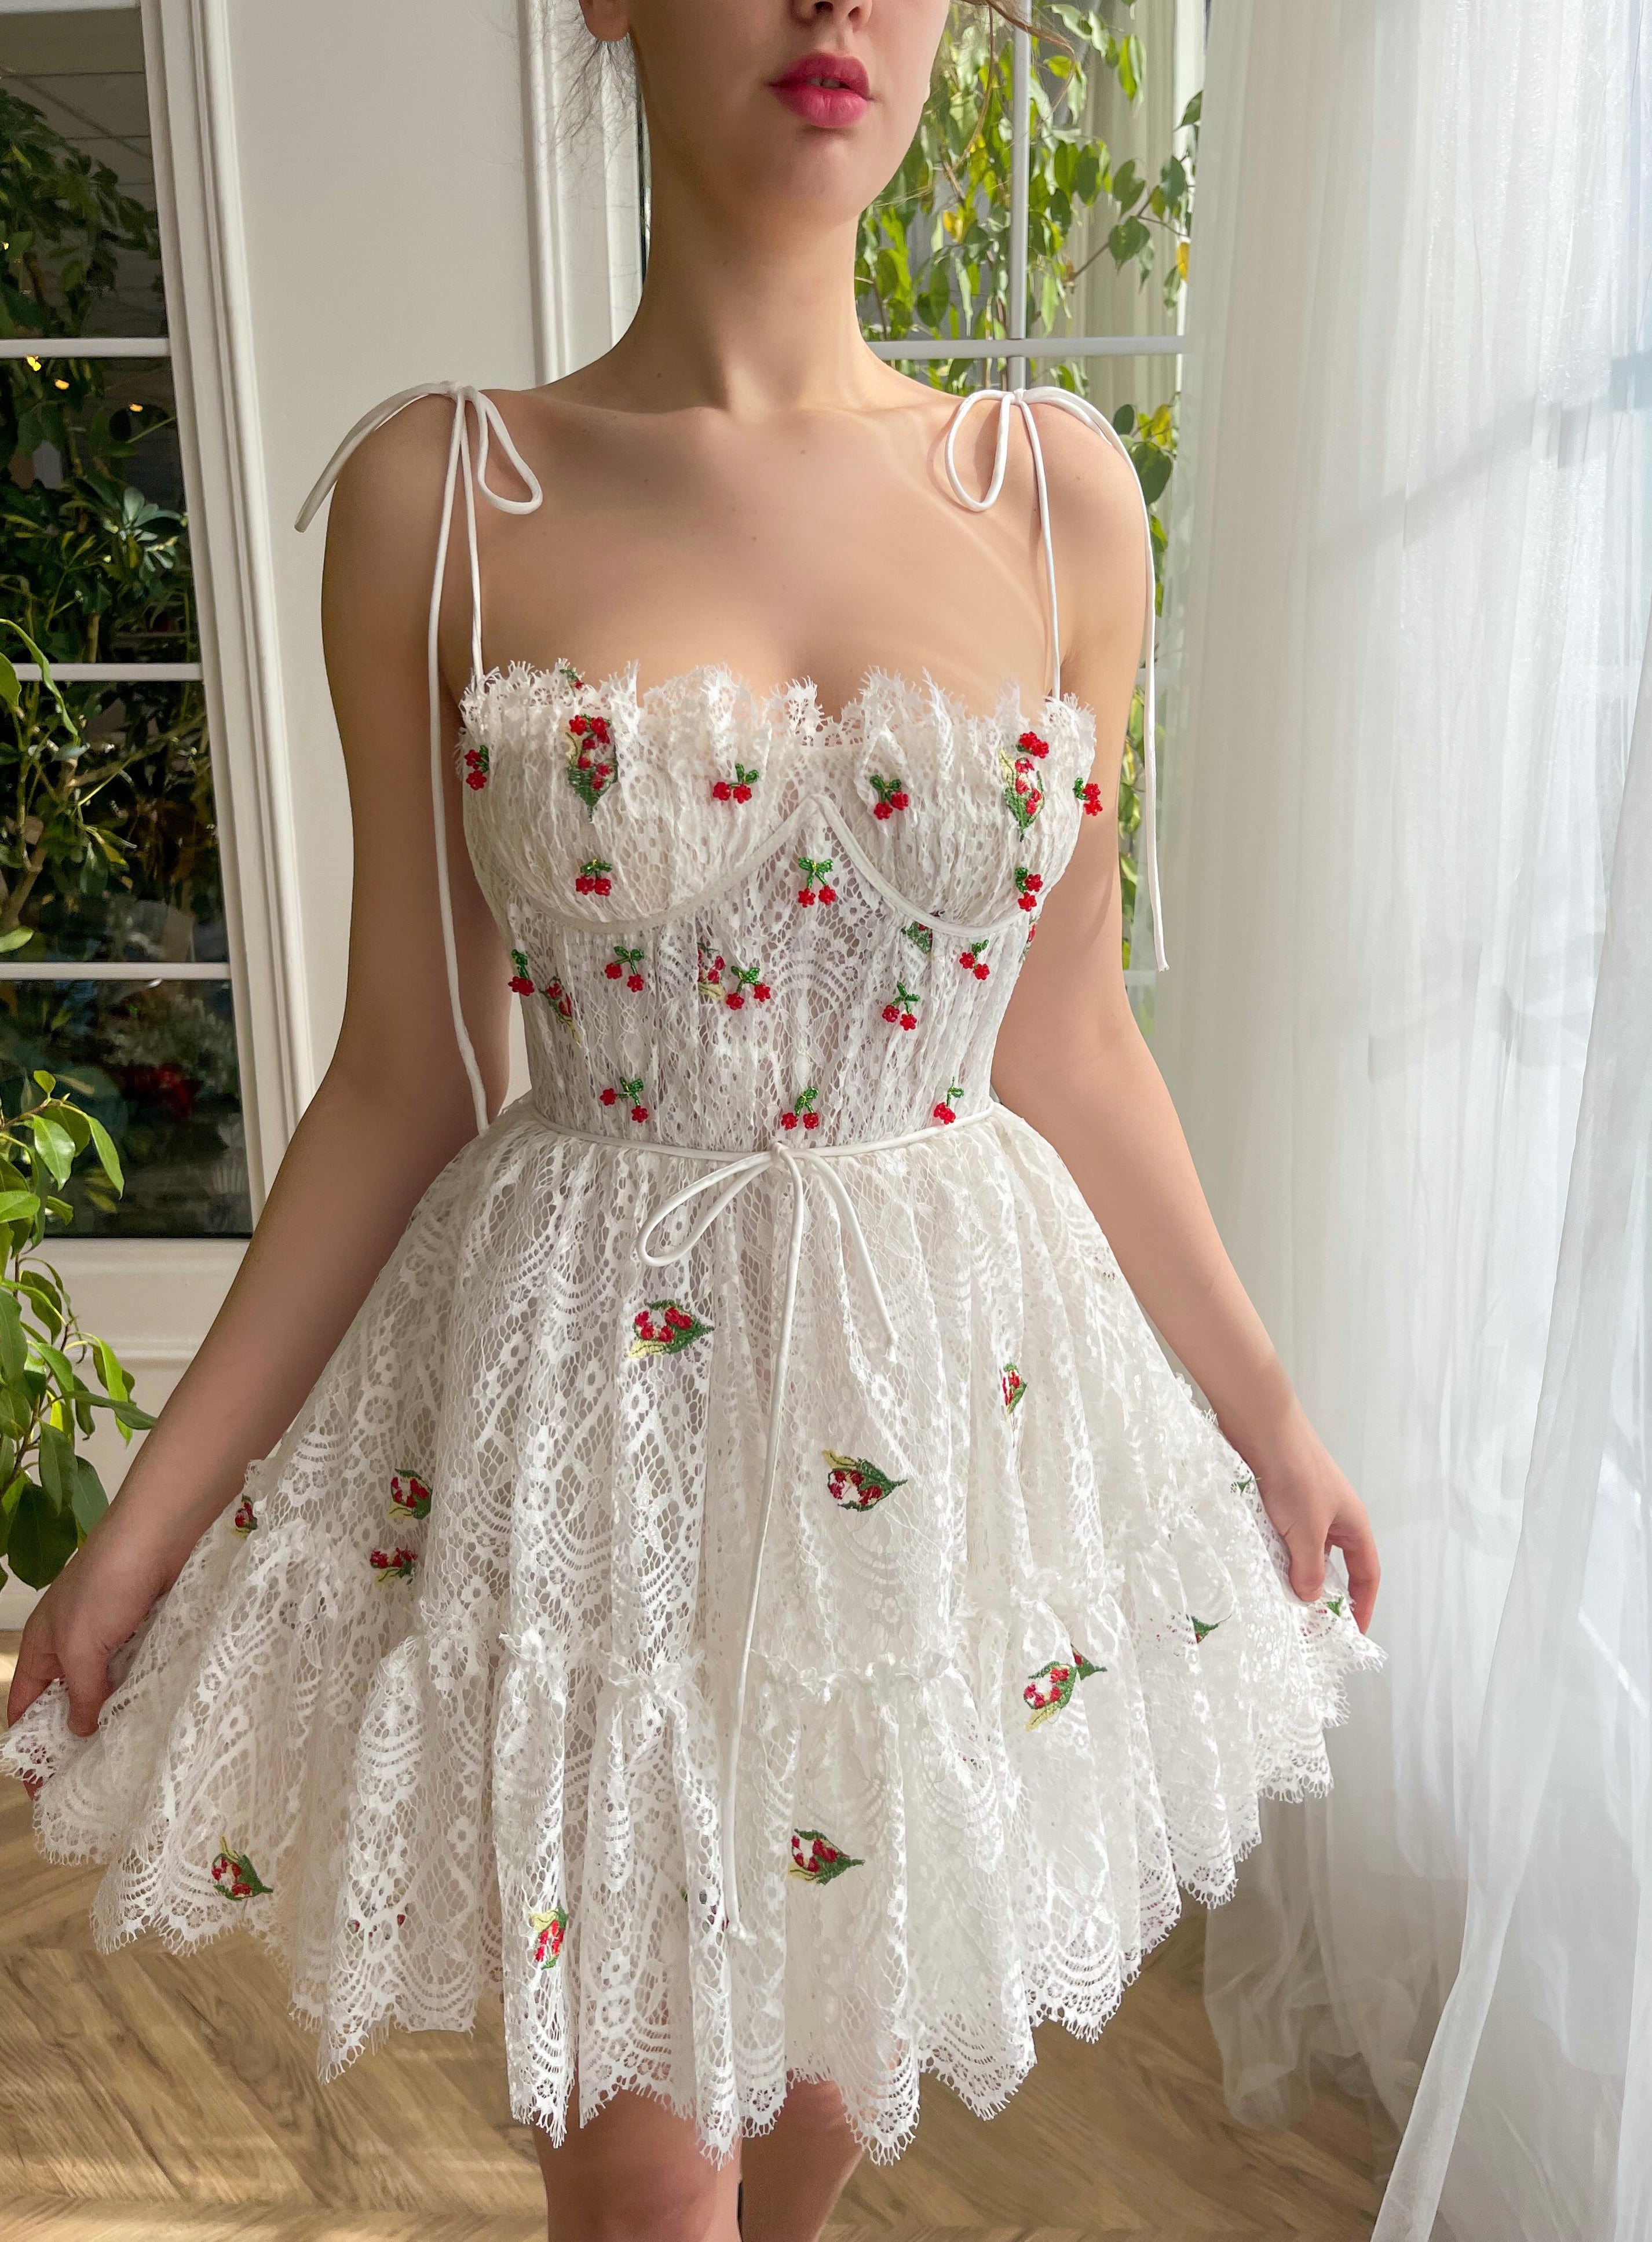 White mini dress with spaghetti straps and embroidered cherries